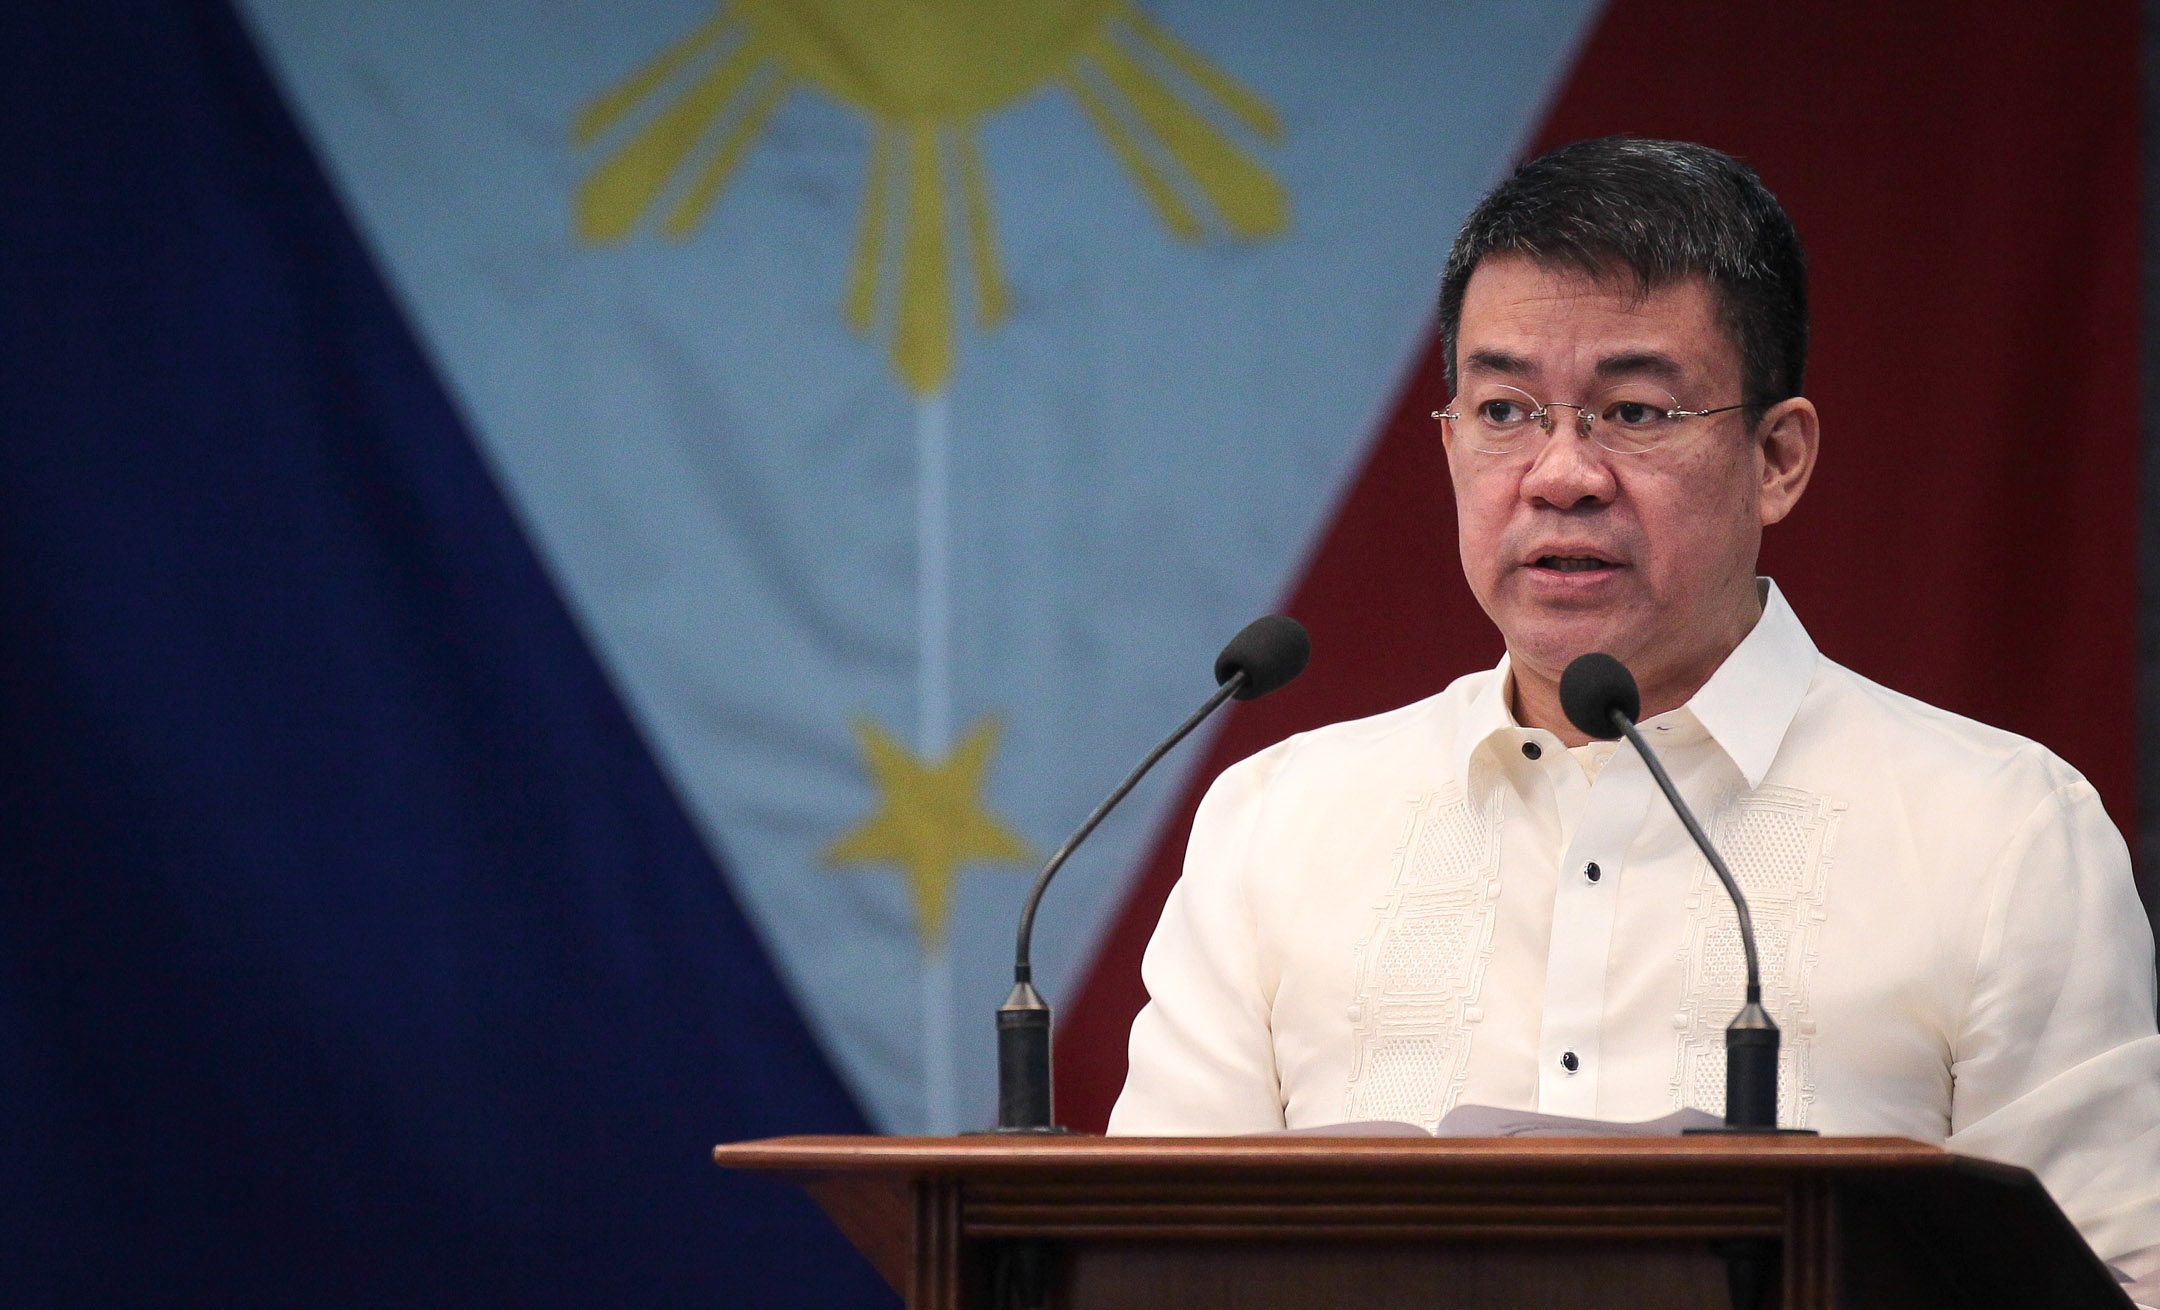 FULL TEXT: ‘We must exceed the standard we set’ – Pimentel